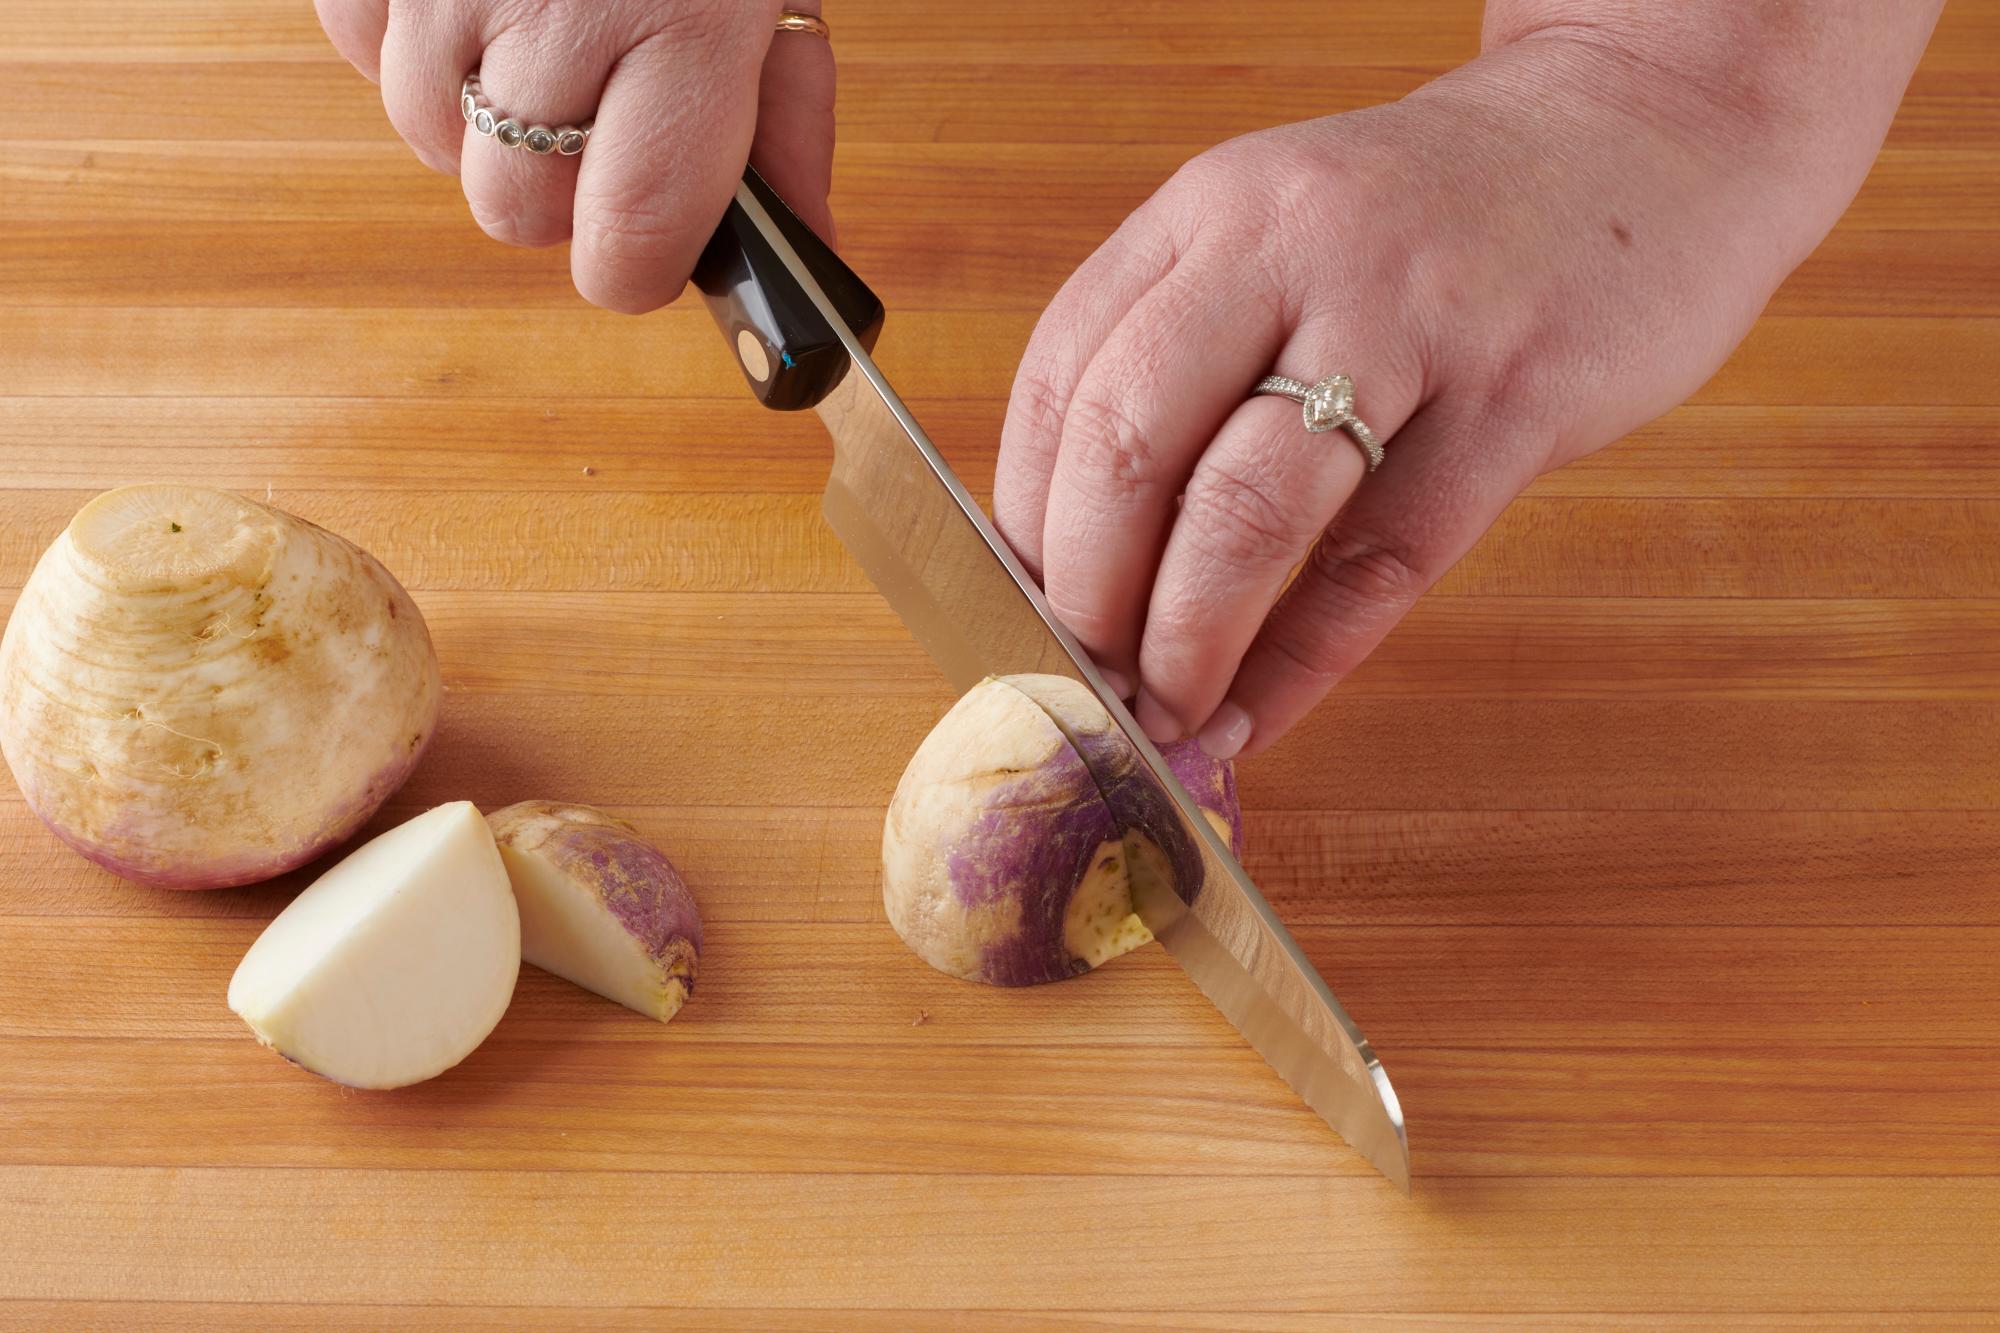 Quarter the turnips with a Hardy Slicer.